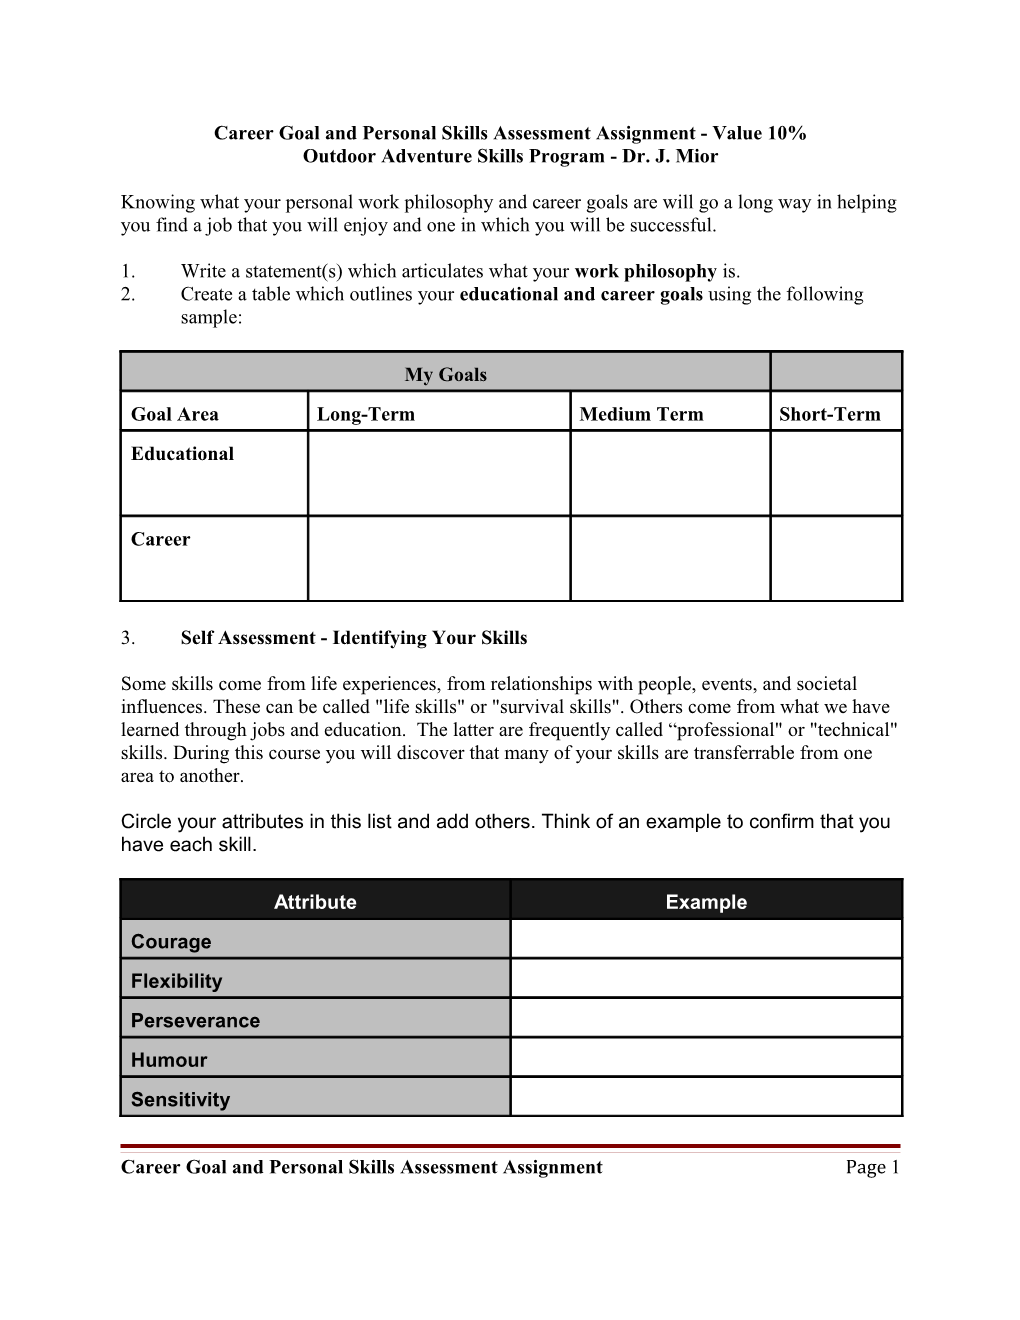 Career Goal and Personal Skills Assessment Assignment - Value 10%